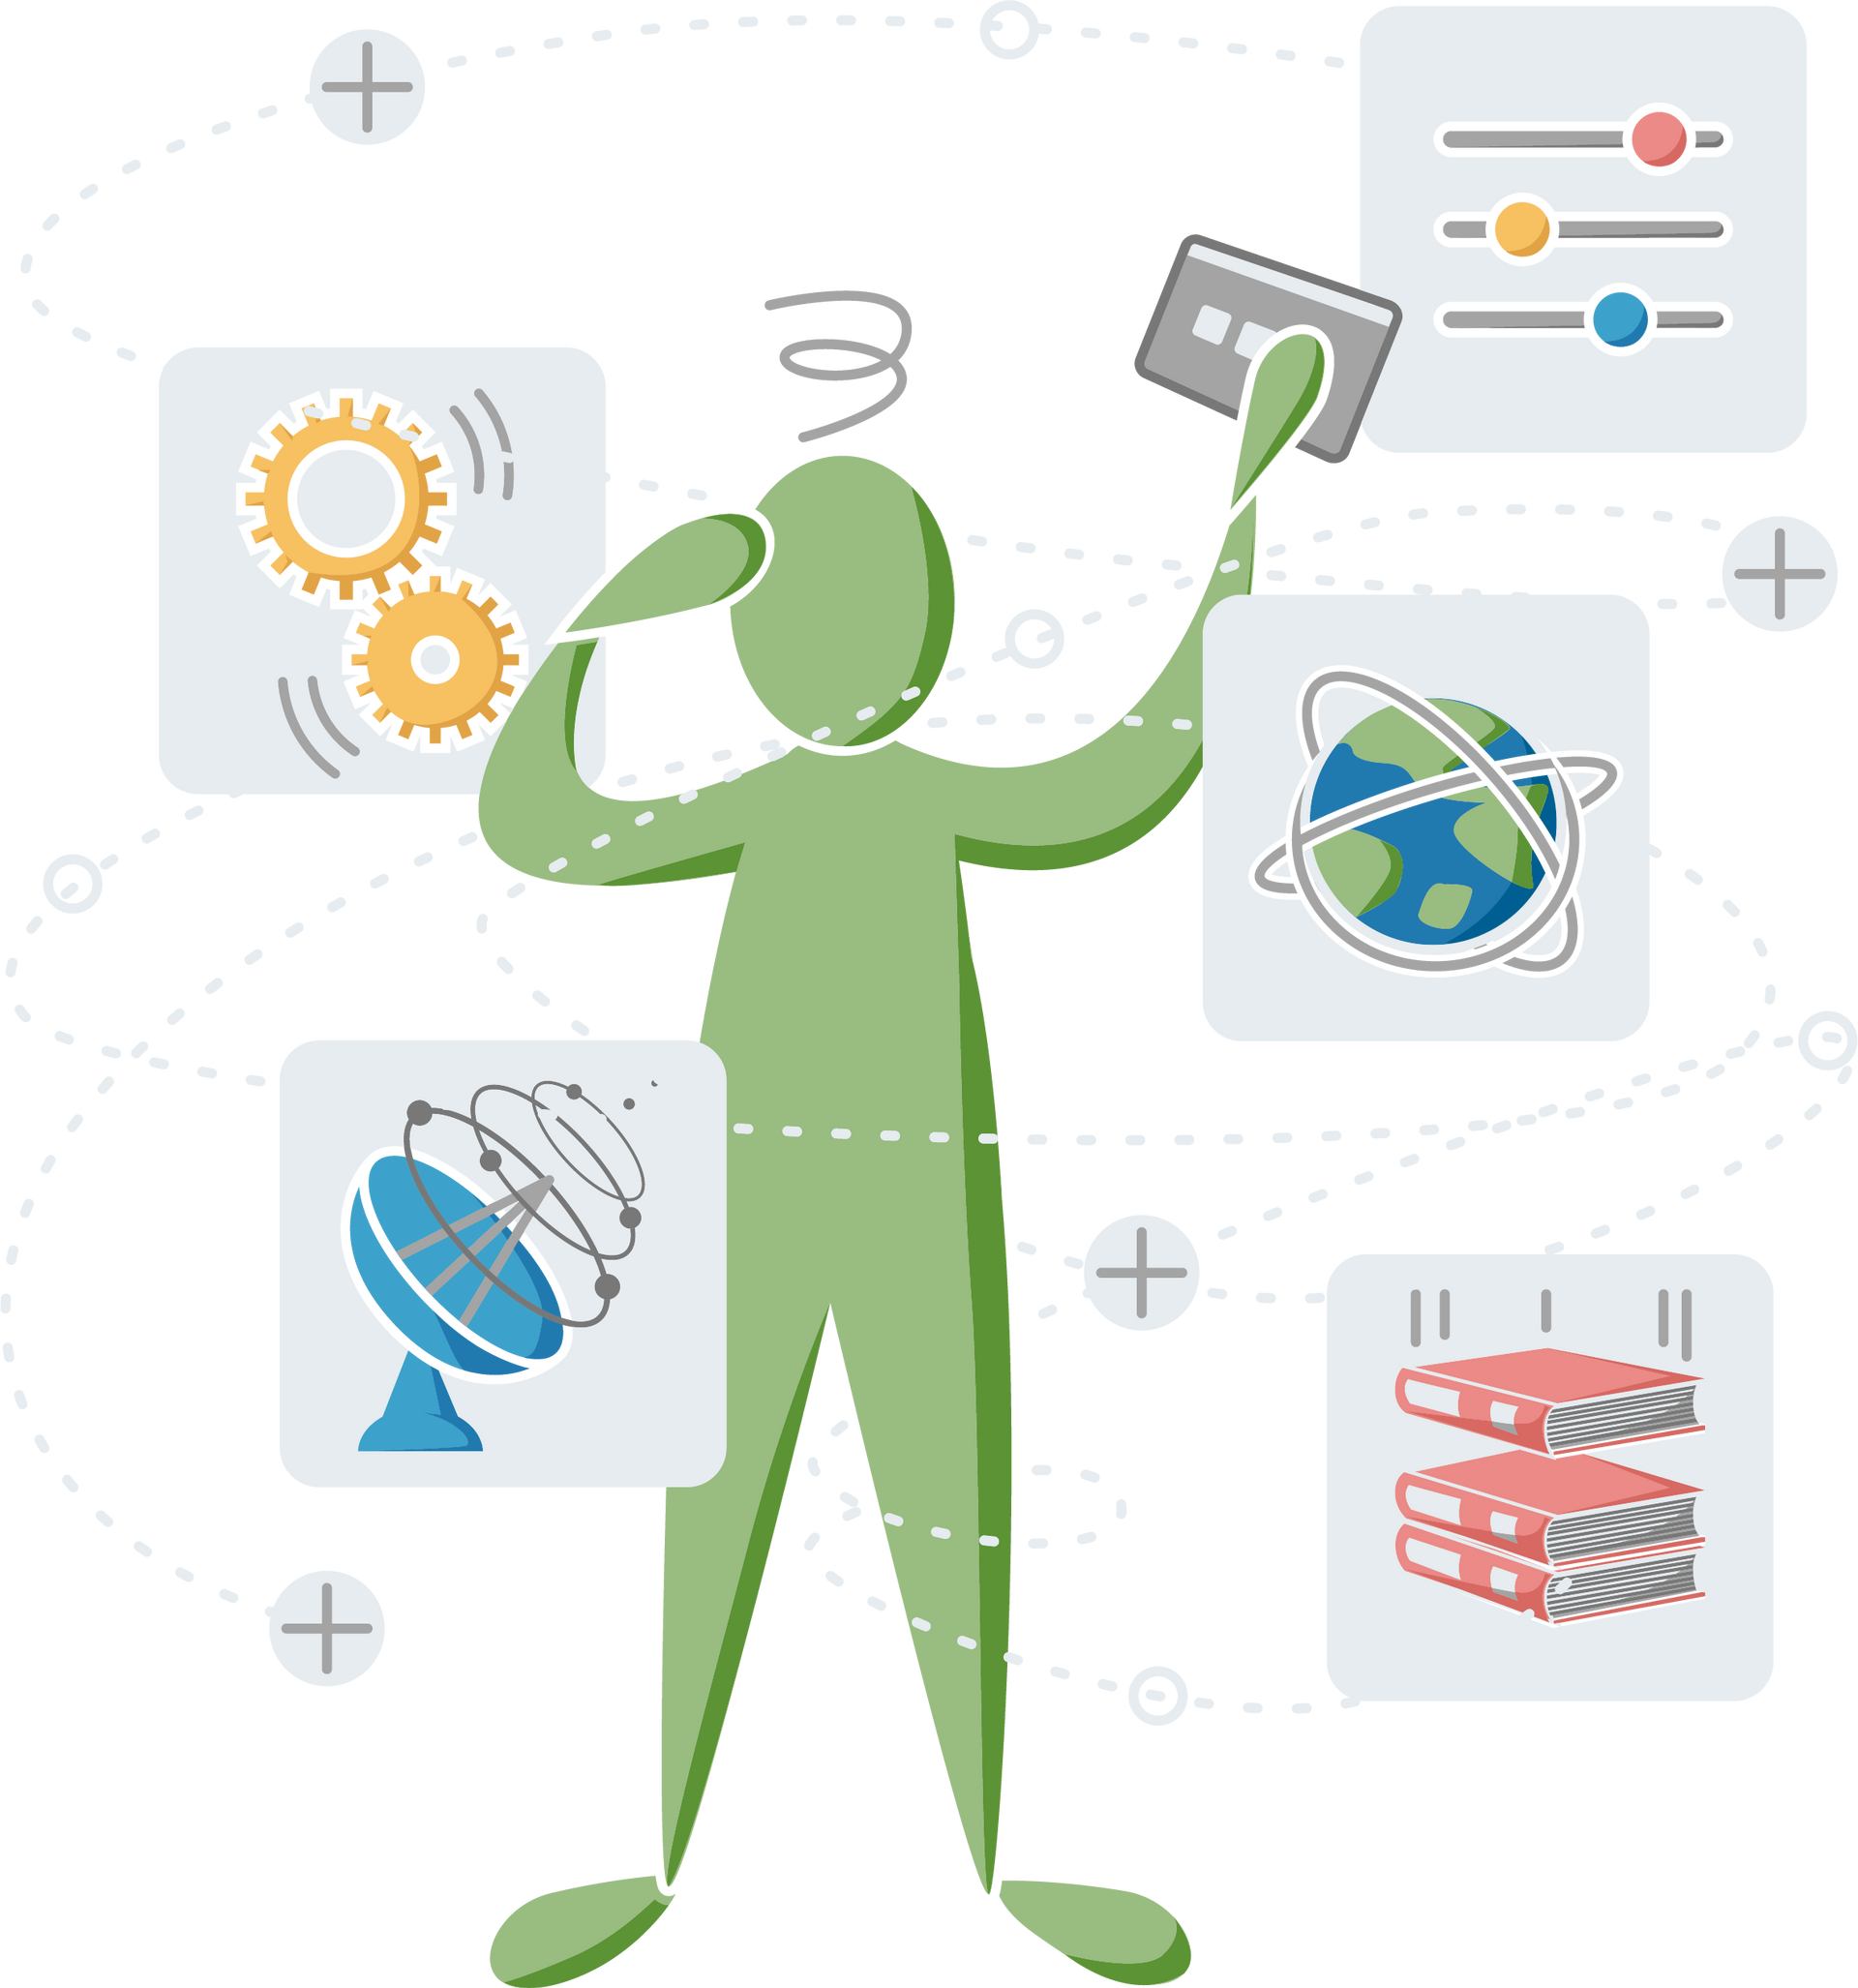 A green silhouette of a person dazed and overwhelmed by the complexity around them including icons representing globalization, technology, compliance, and operations.